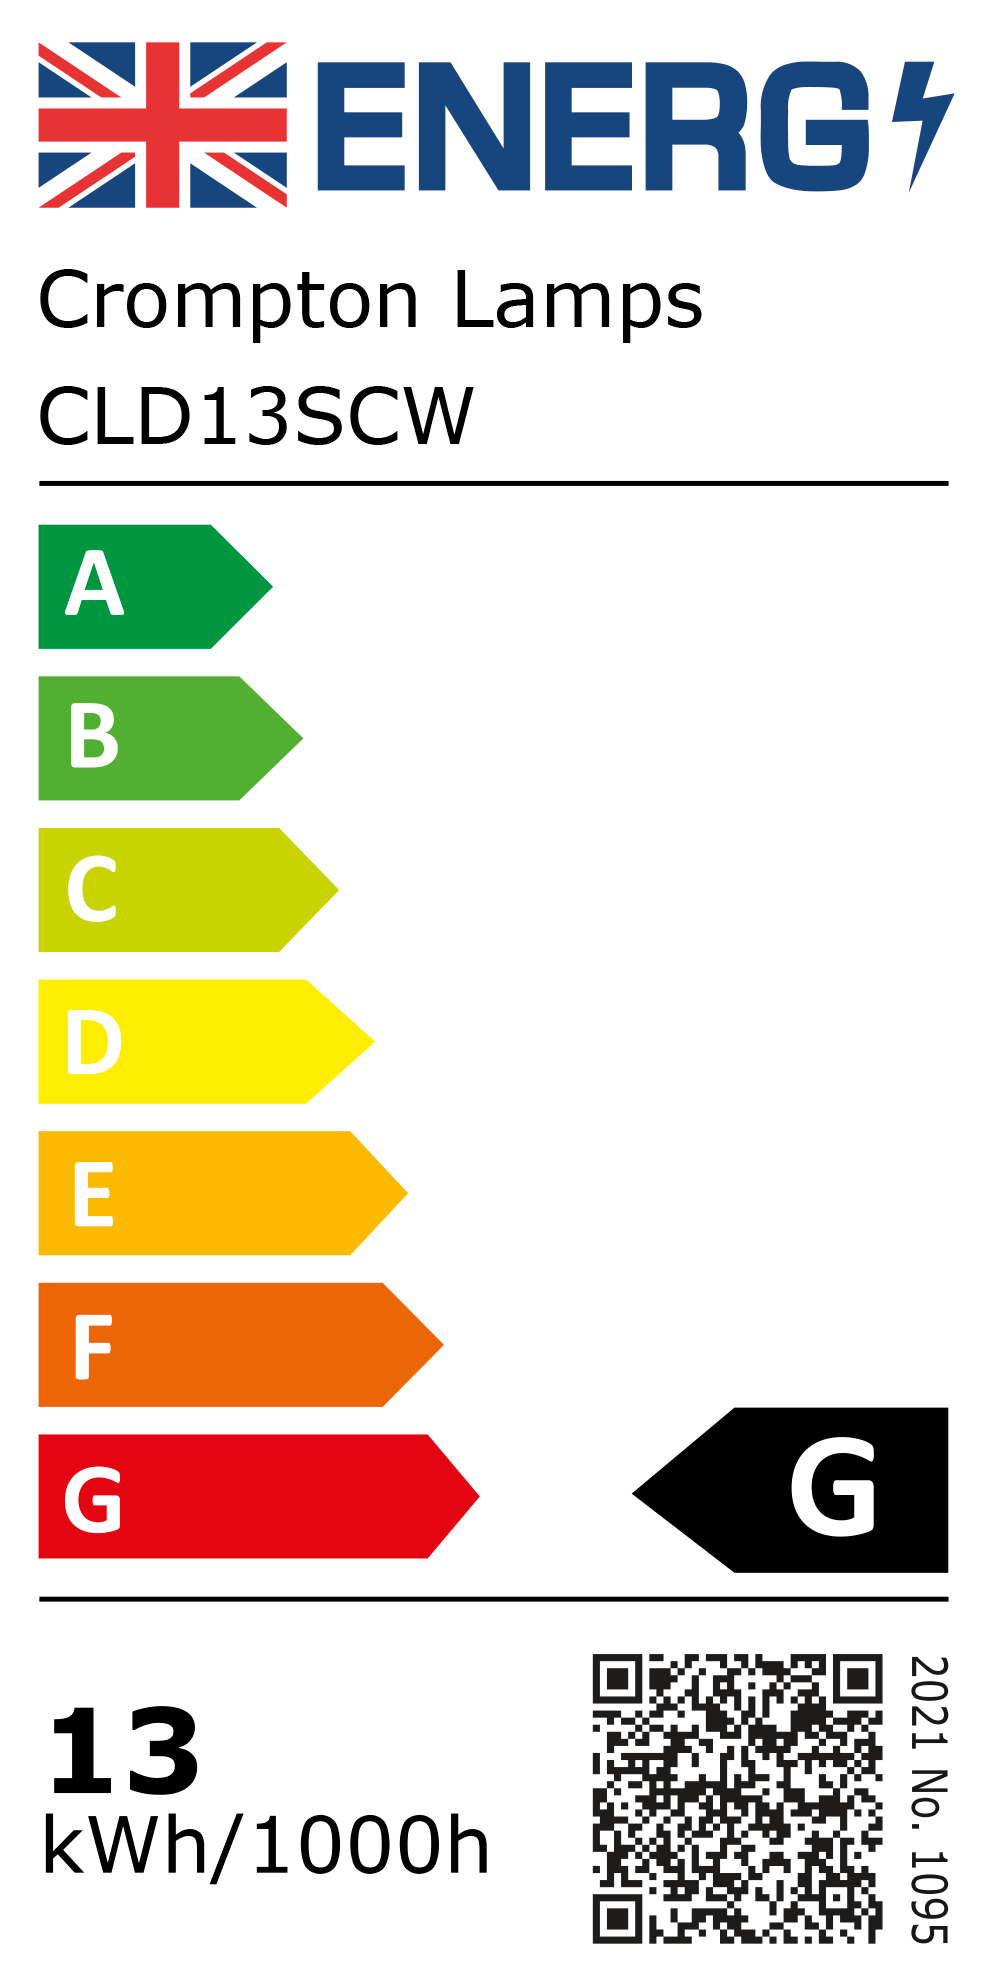 New 2021 Energy Rating Label: Stock Code CLD13SCW